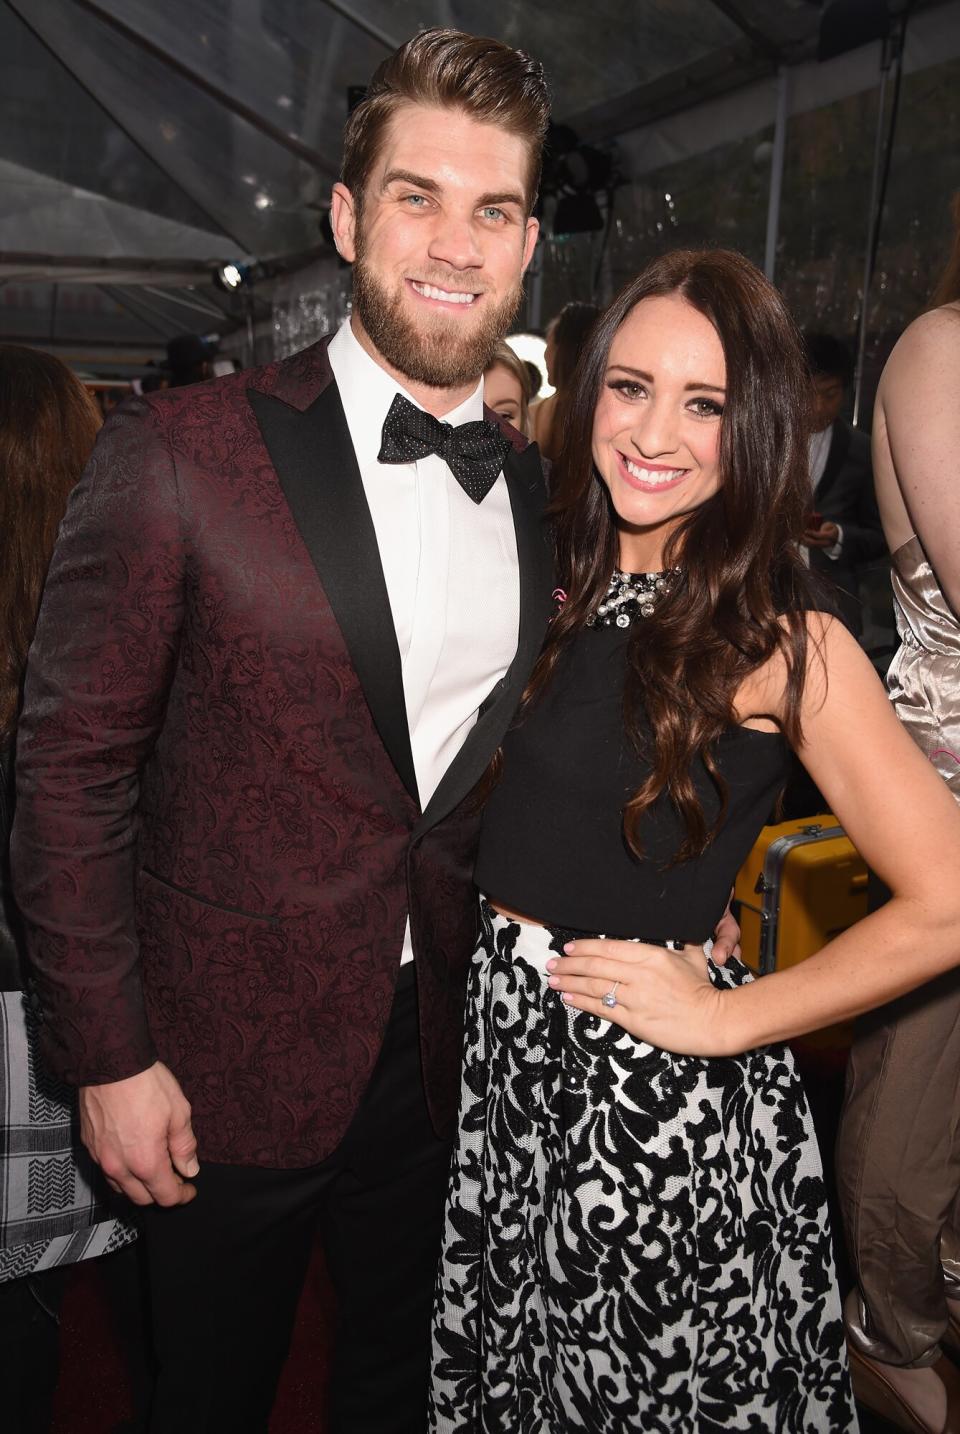 Bryce Harper and Kayla Varner attend the 2016 American Music Awards at Microsoft Theater on November 20, 2016 in Los Angeles, California